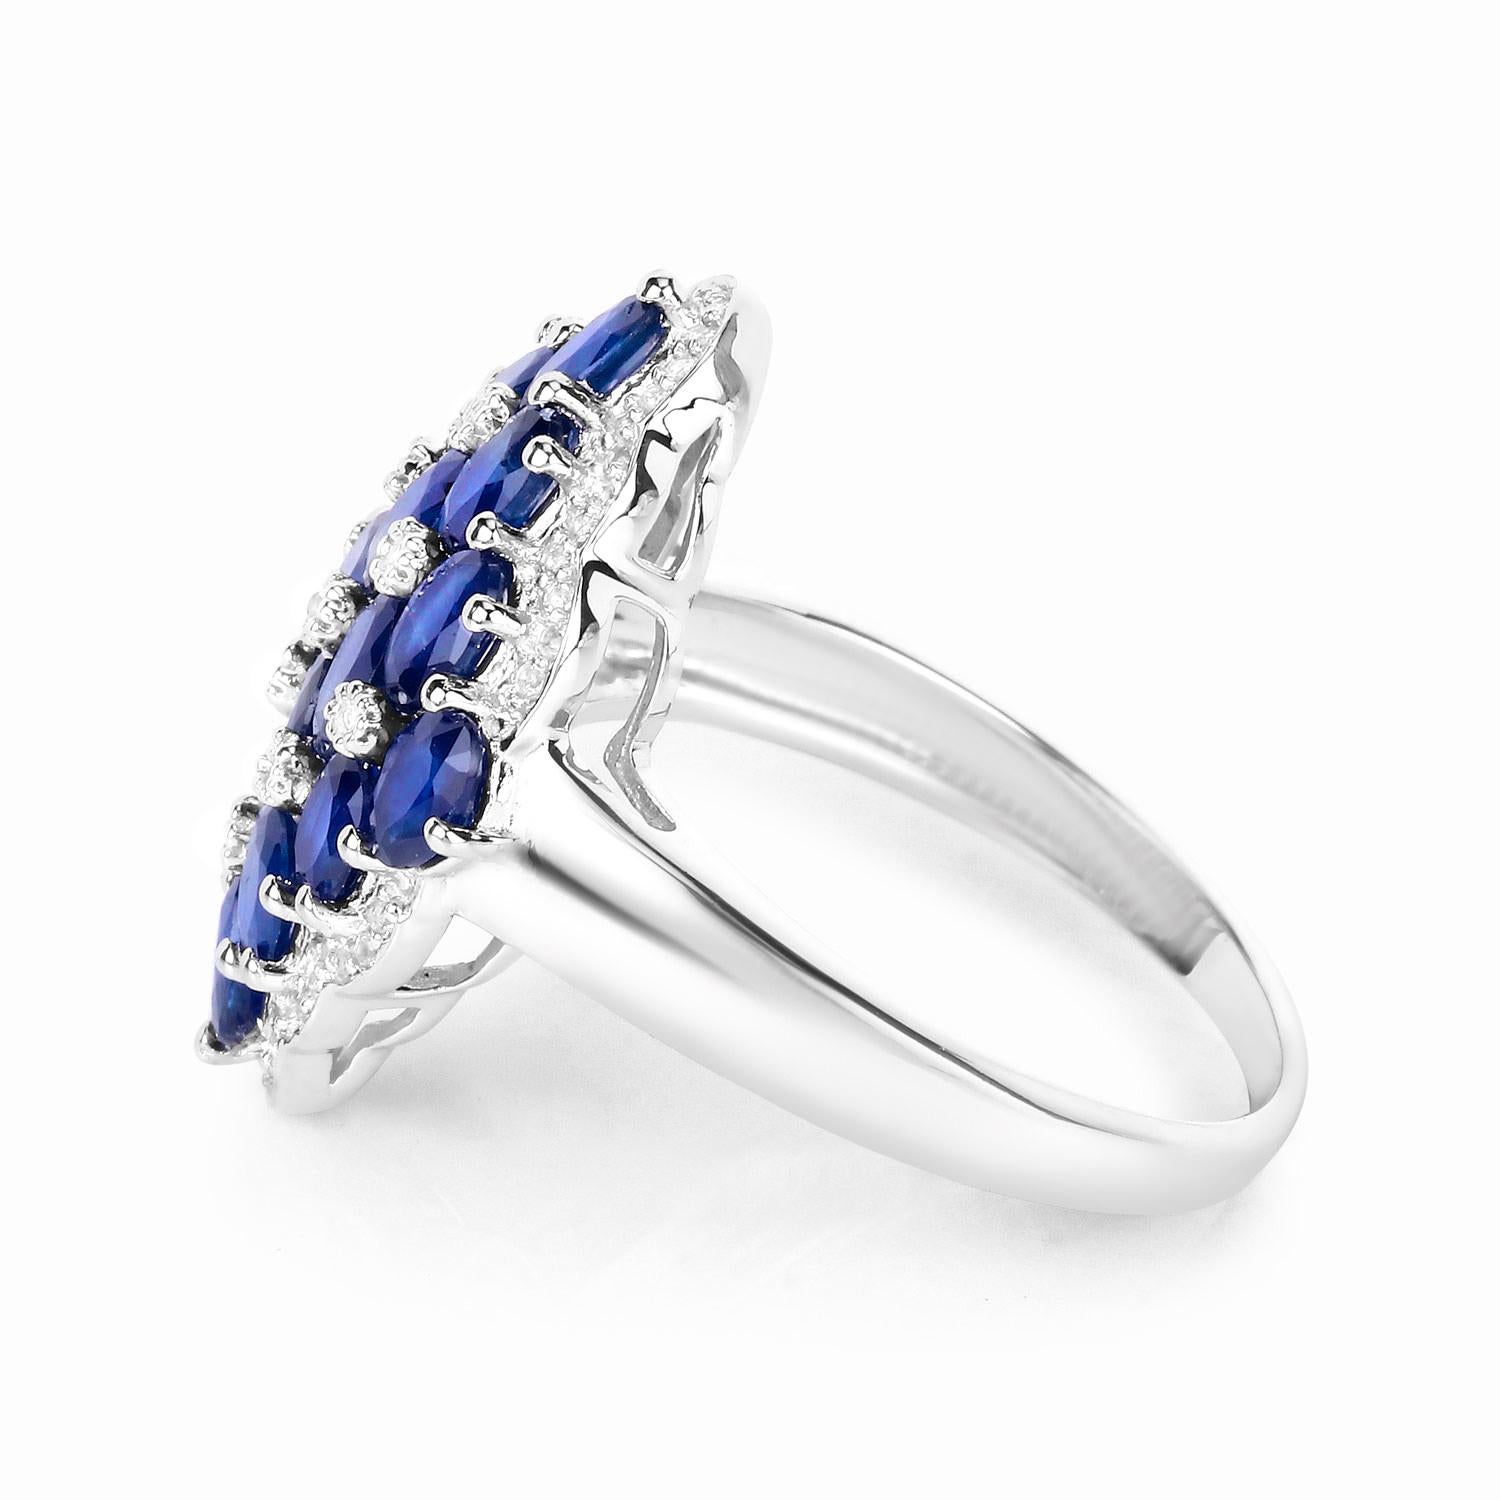 Women's or Men's Blue Sapphire Cluster Ring White Zircon 3.49 Carats For Sale